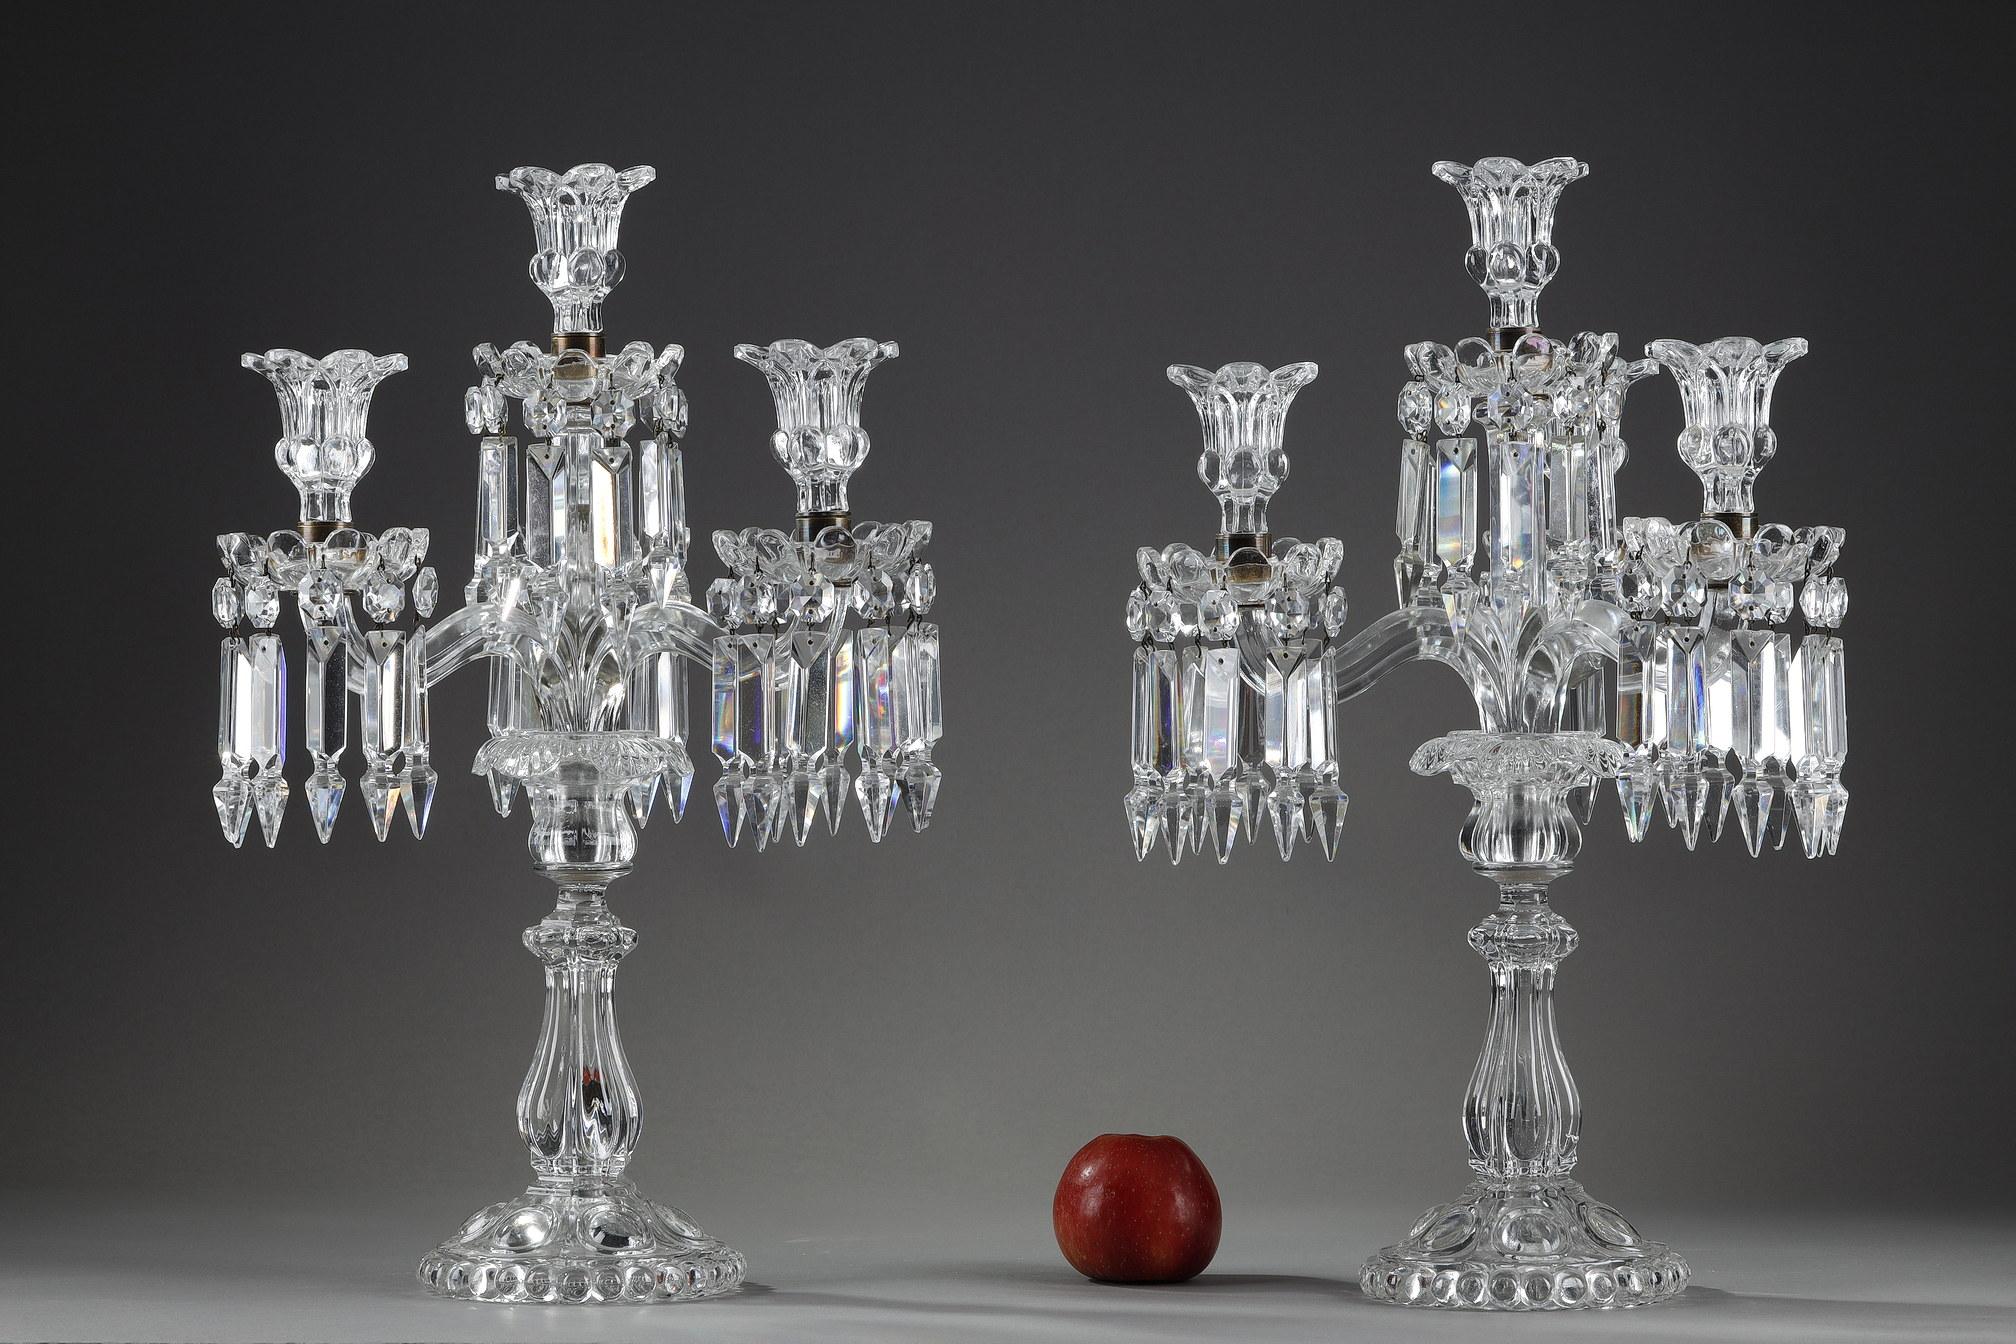 Pair of crystal girandoles with four lights on two levels from the Baccarat House. They are decorated with geometrical crystal pendants, the shafts are ringed and the feet have gadroon motifs. 

It is a production of the 20th century made by the